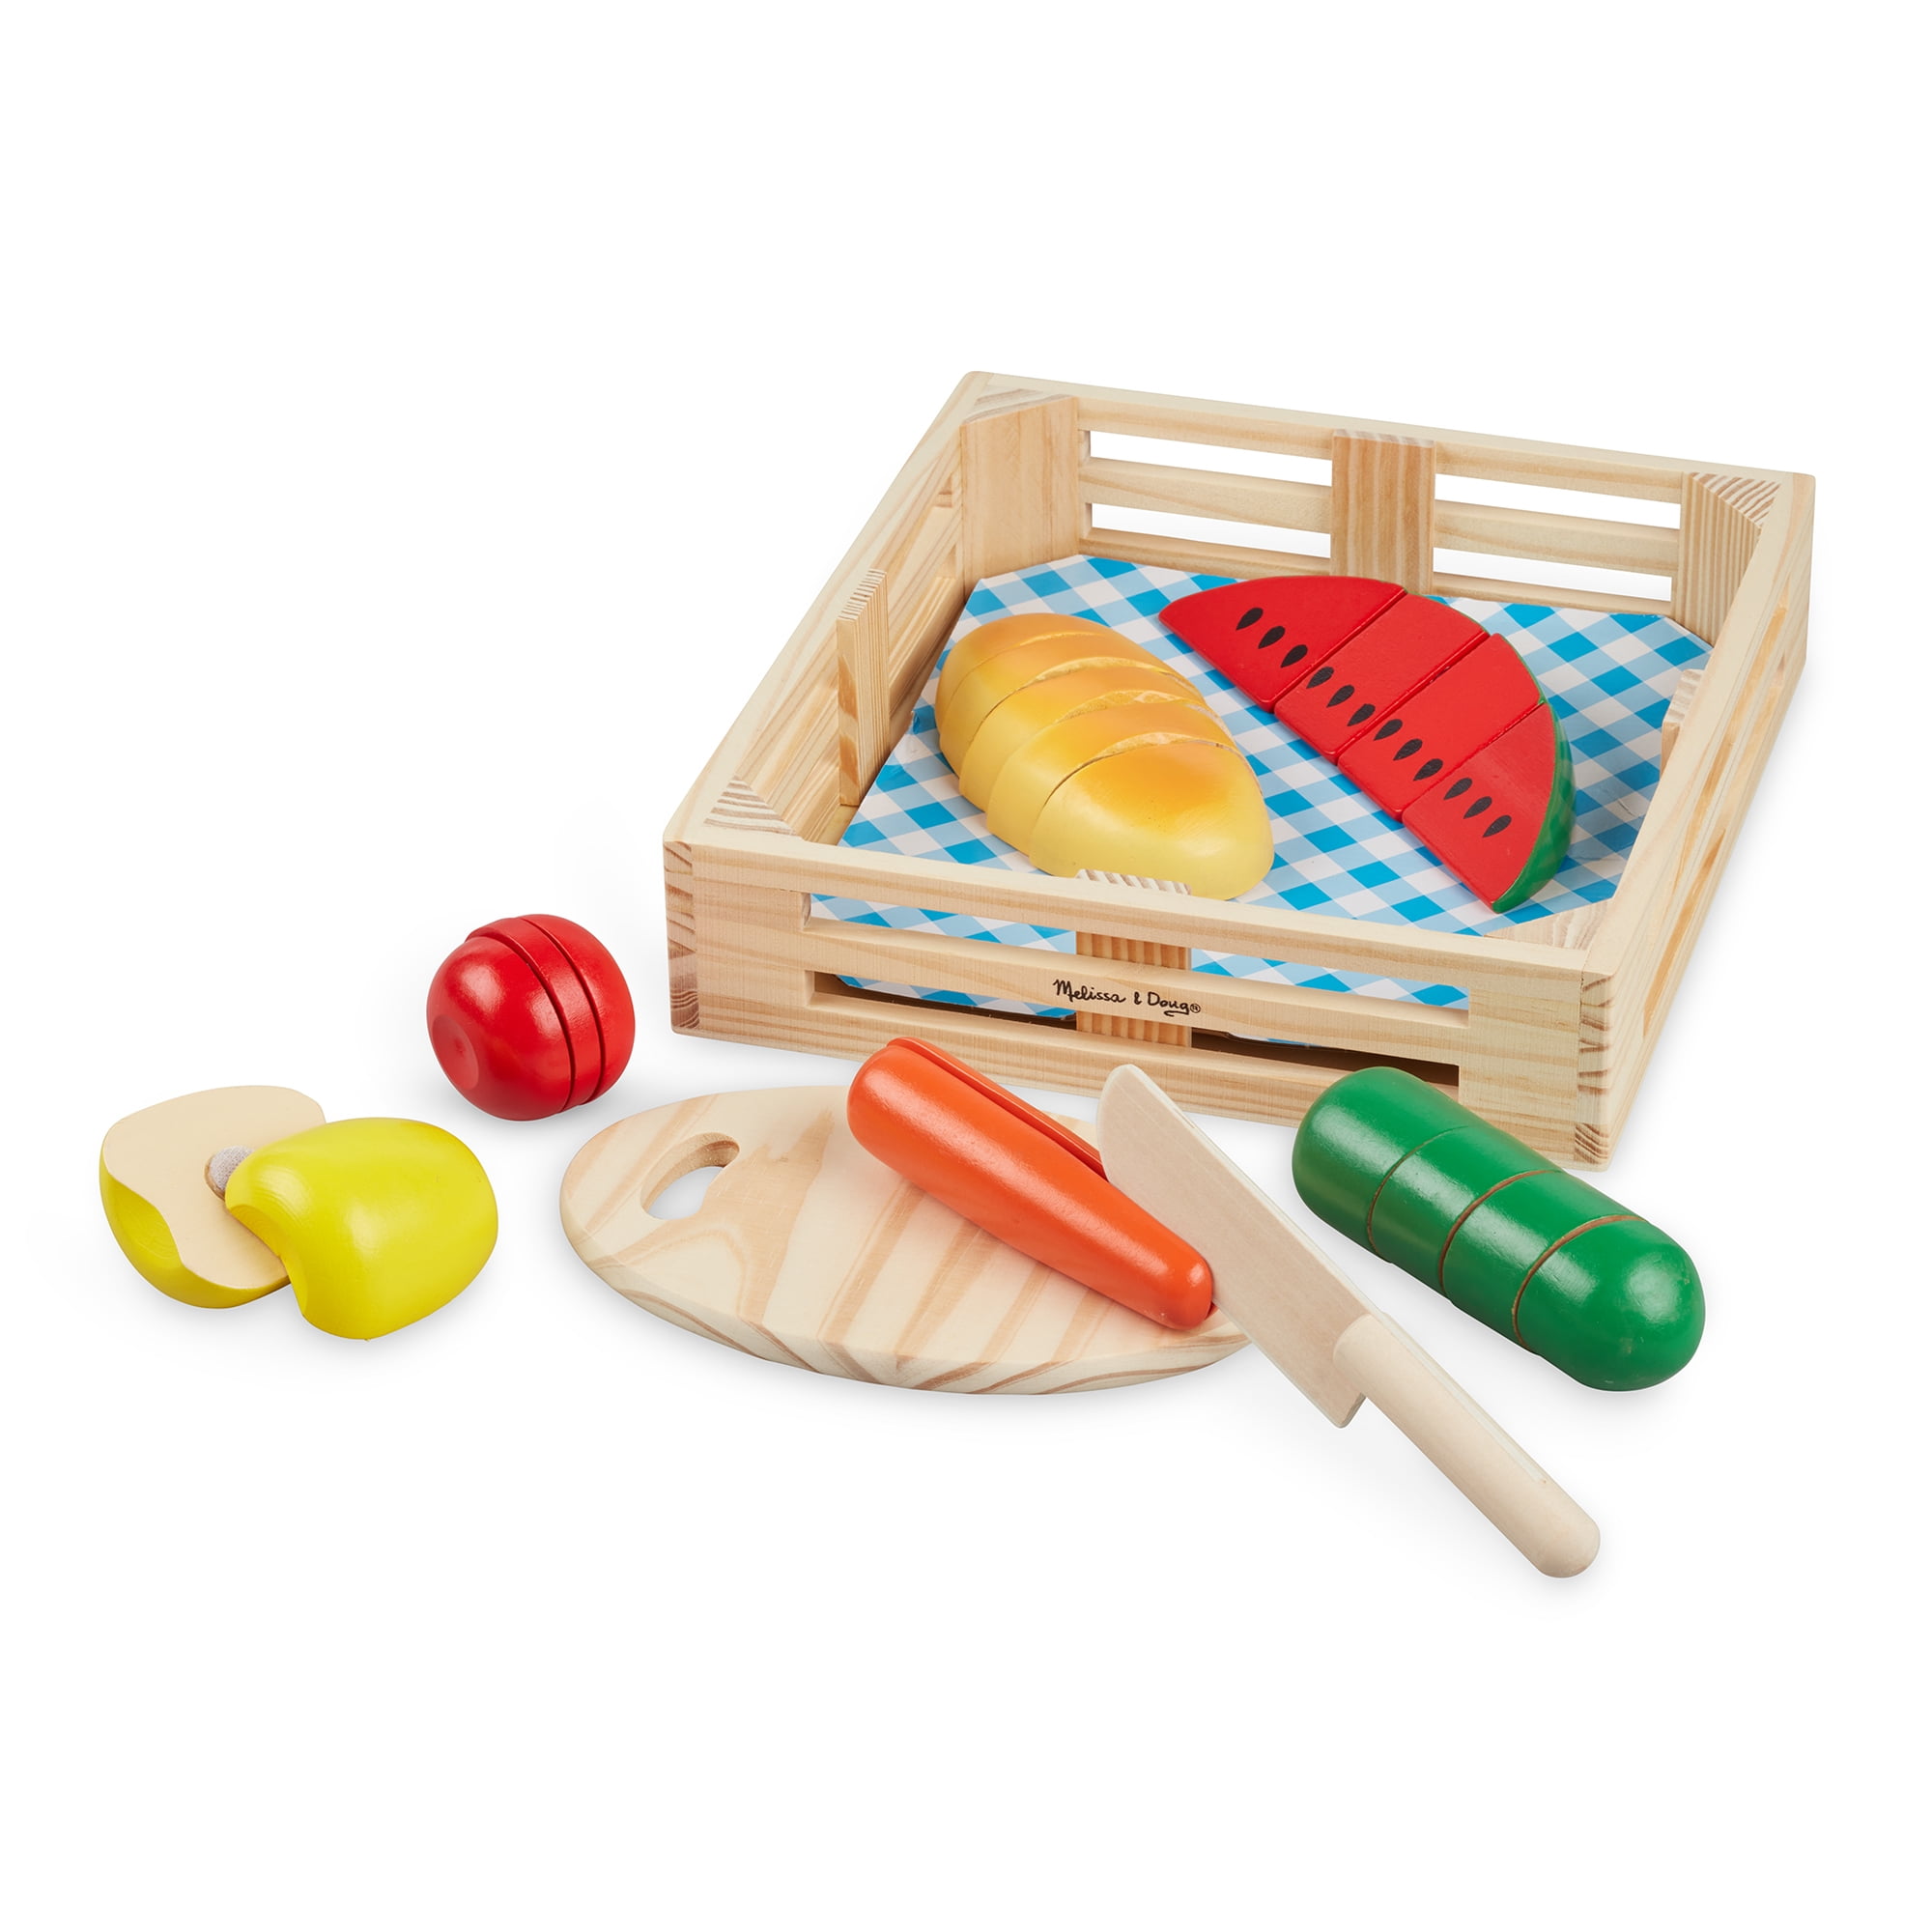 Pizza make believe wooden play-food toy 